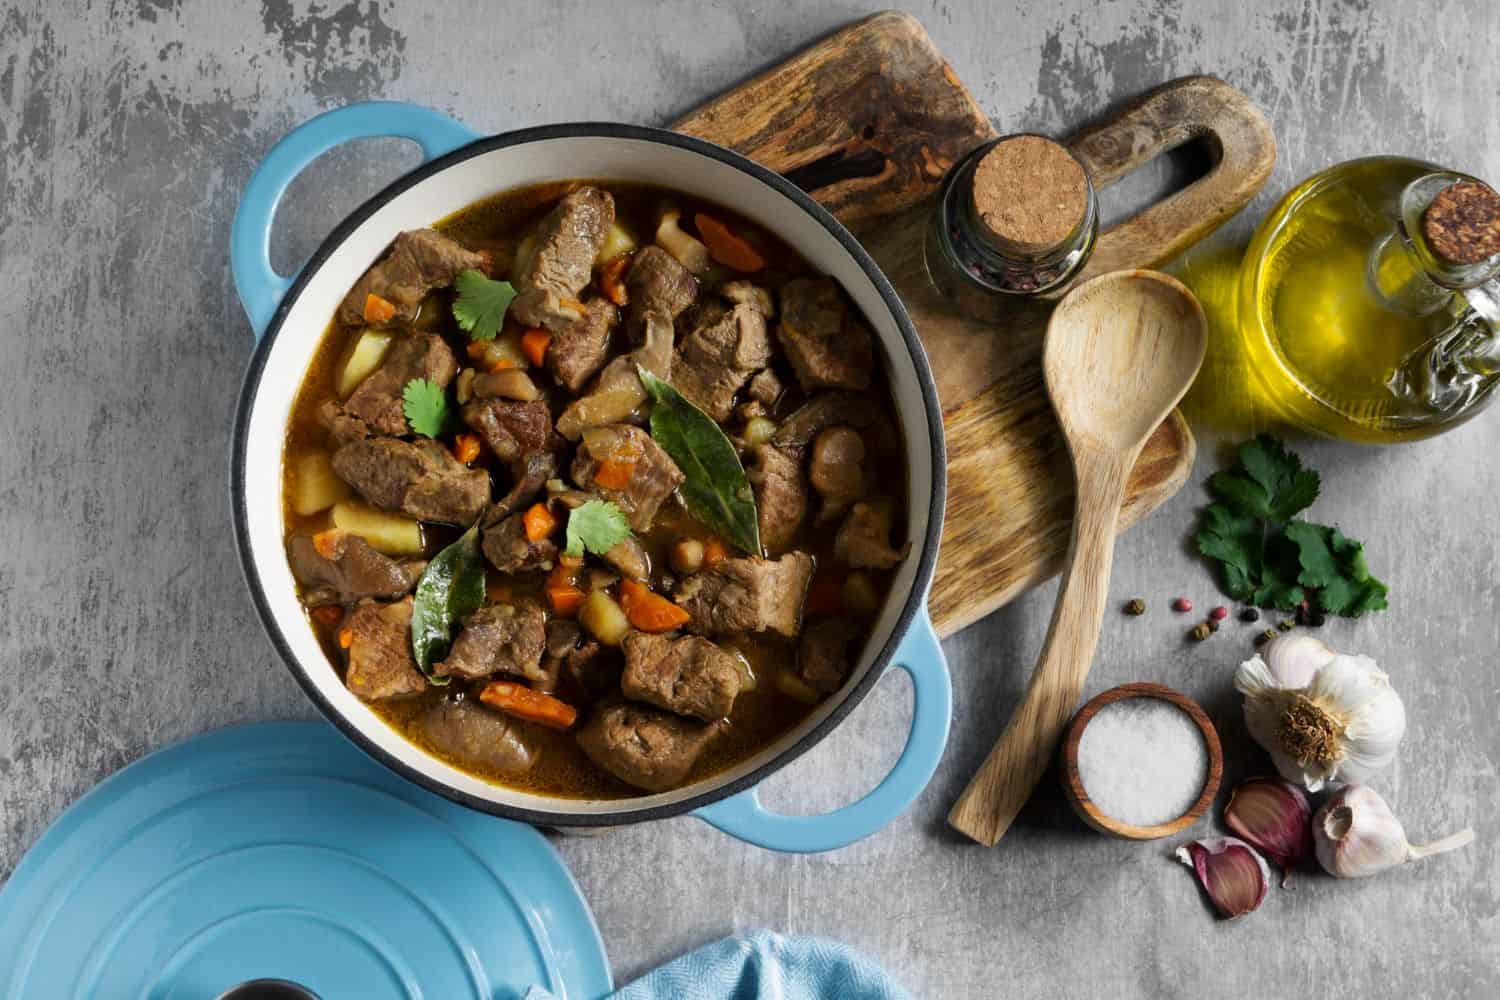 One Pot Meals: 7 Quick, Easy, and Delicious Recipes